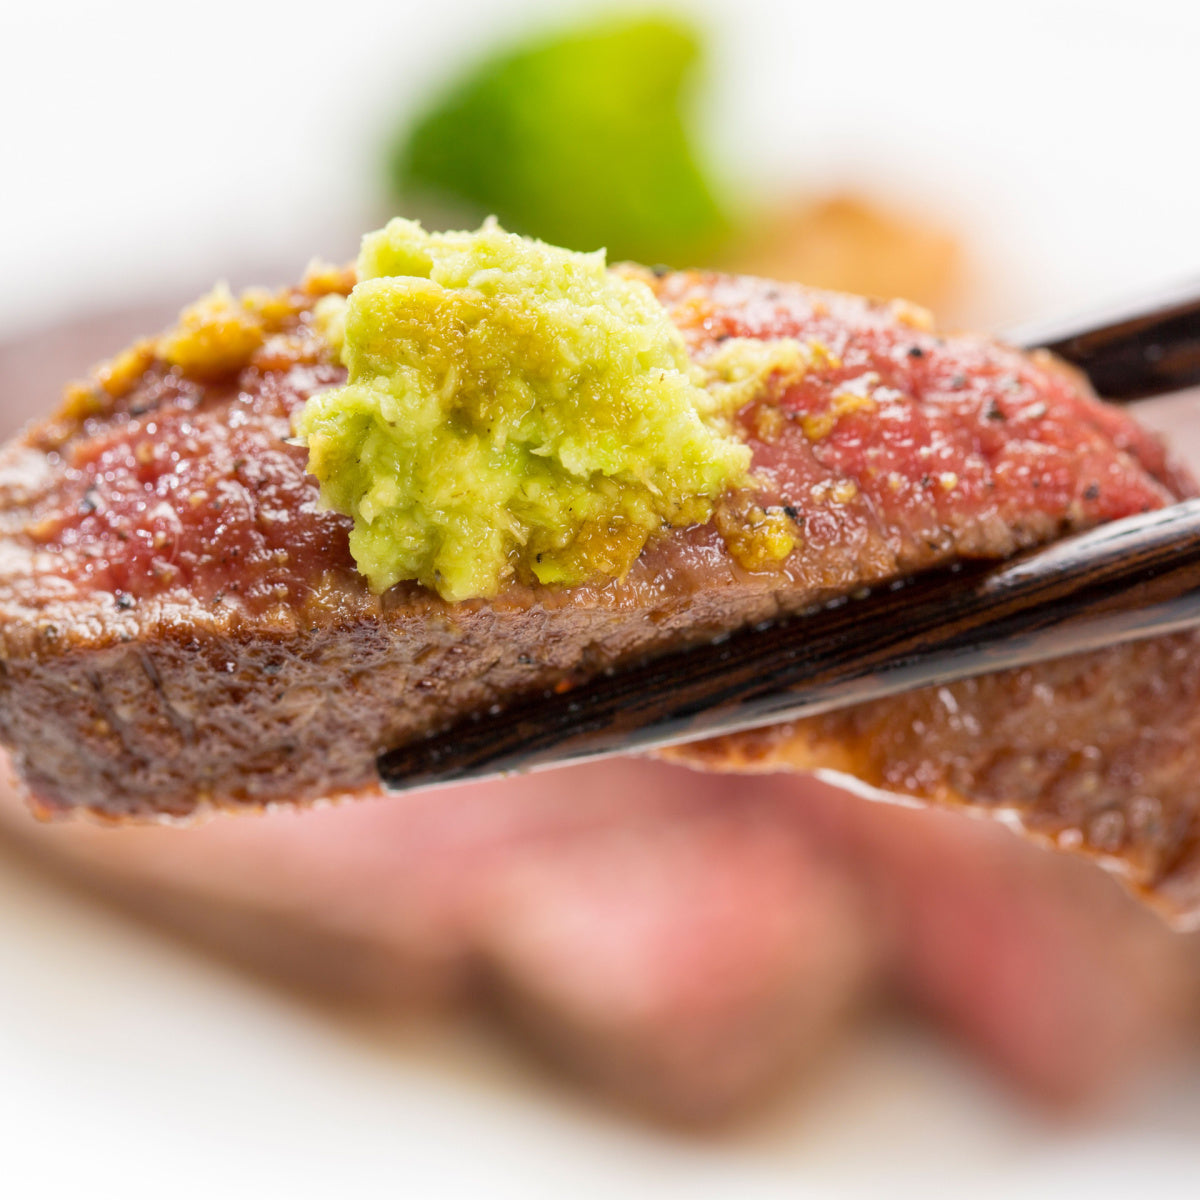 Japanese Beef & Wasabi Pie. Limited edition